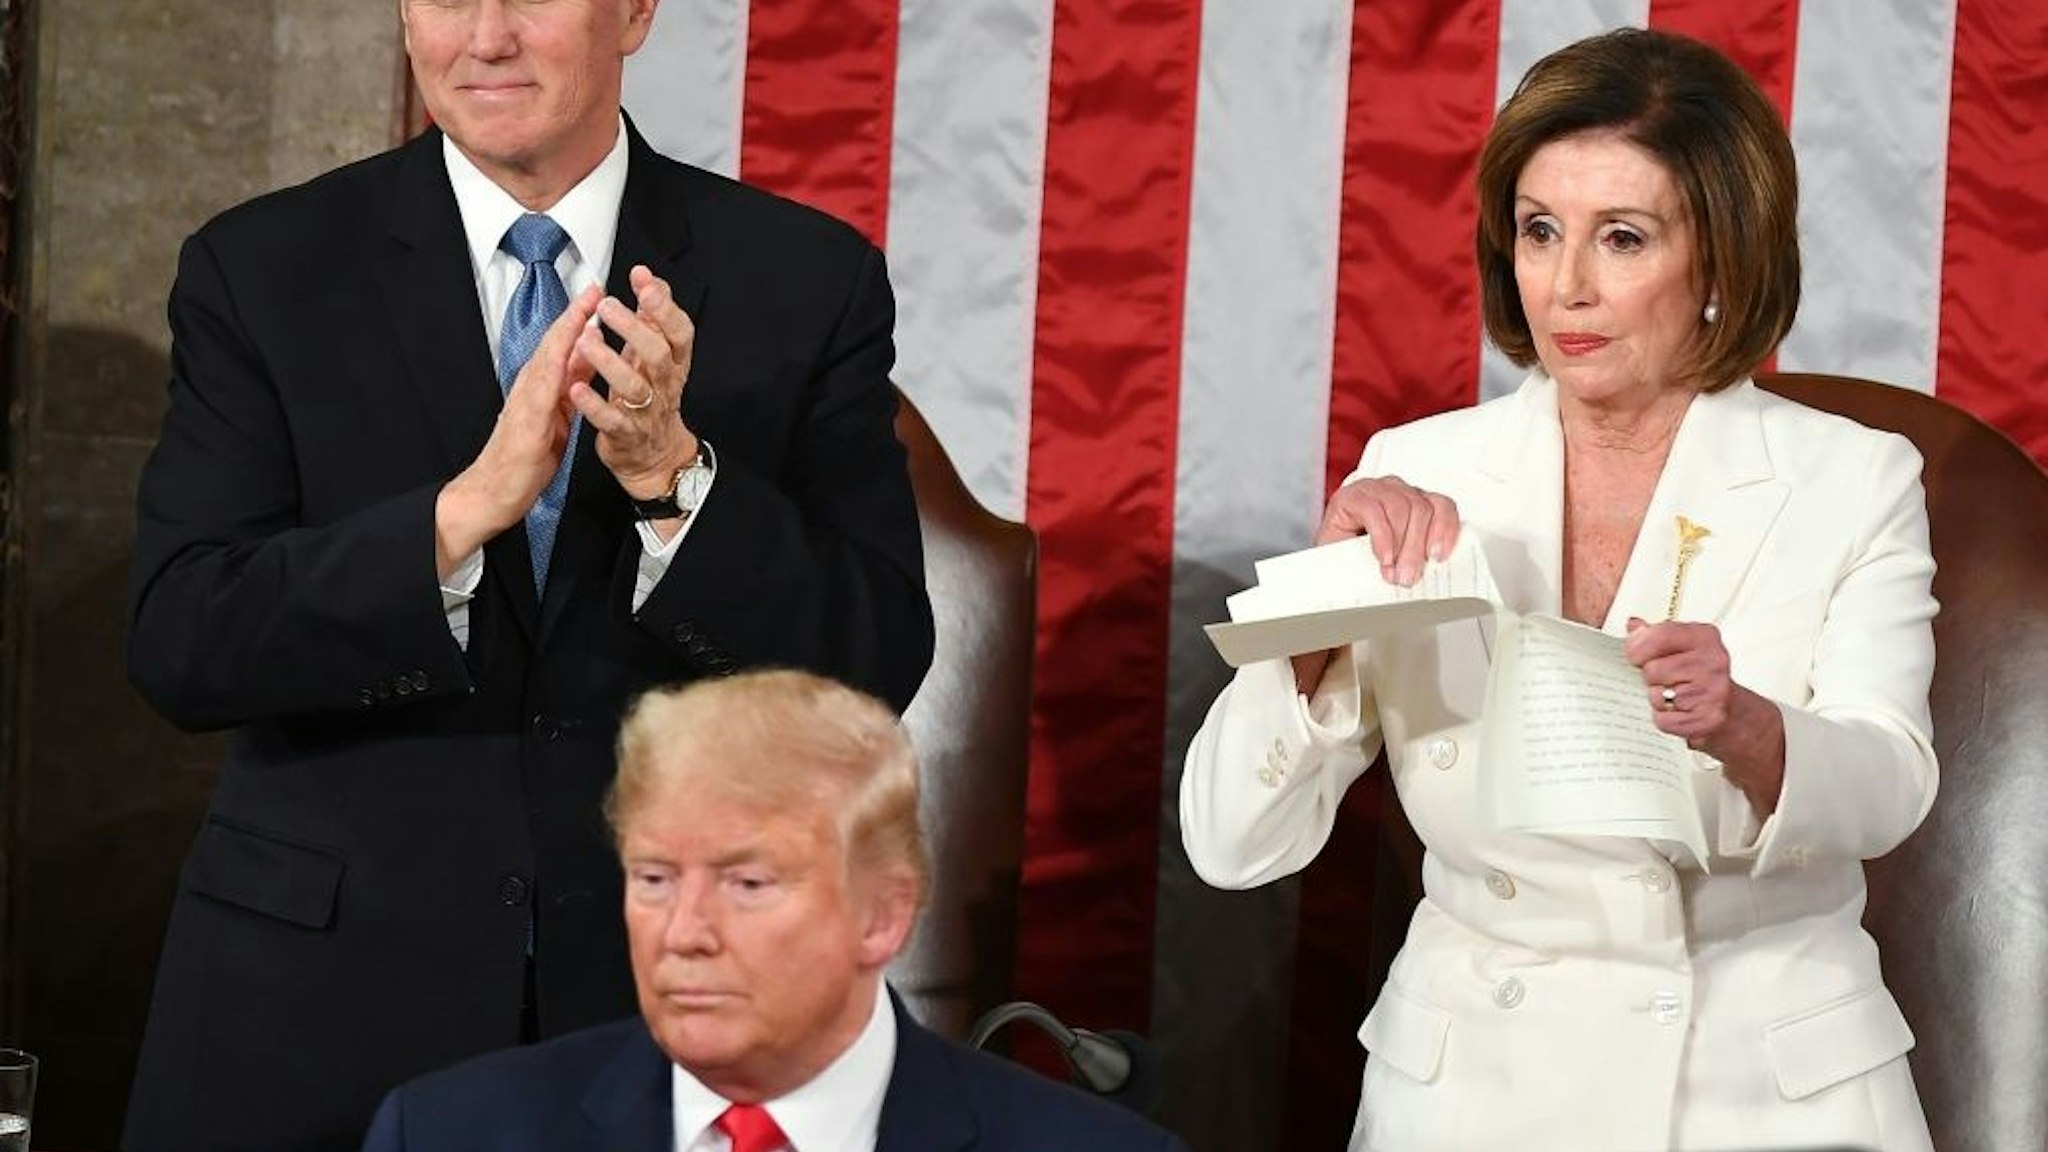 TOPSHOT - Speaker of the US House of Representatives Nancy Pelosi rips a copy of US President Donald Trumps speech after he delivered the State of the Union address at the US Capitol in Washington, DC, on February 4, 2020. (Photo by MANDEL NGAN / AFP) (Photo by